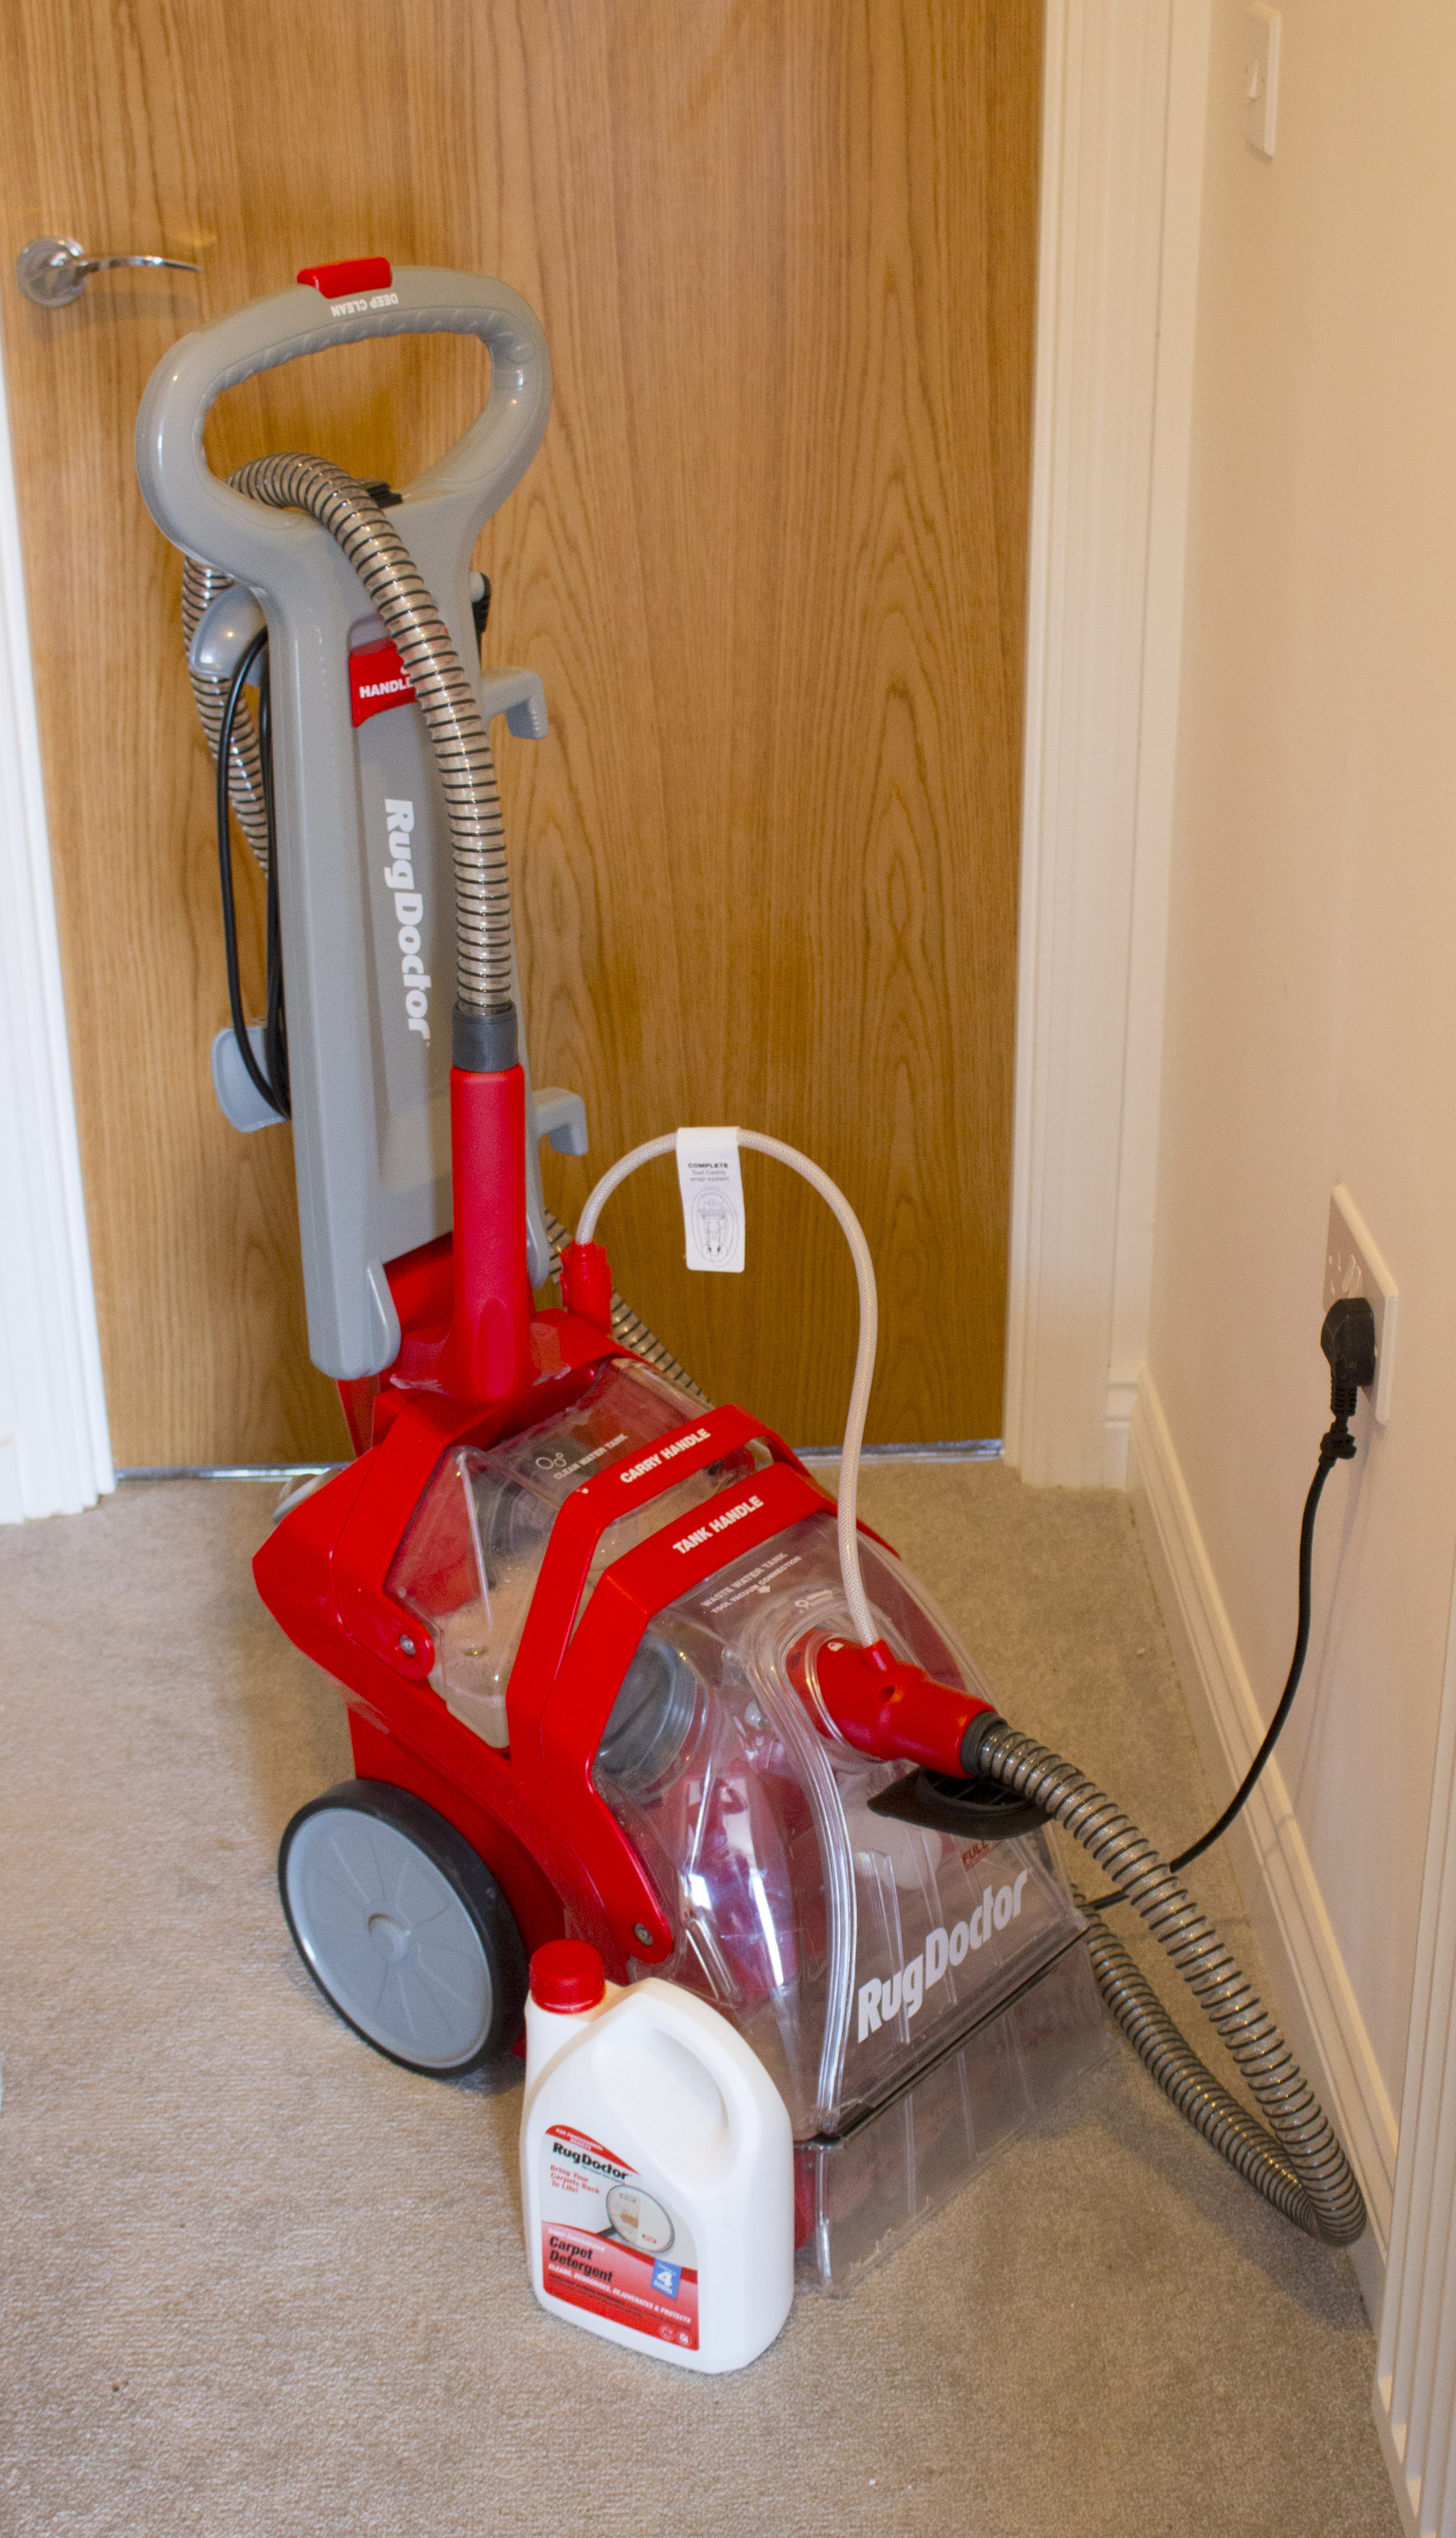 The Rug Doctor Deep Carpet Cleaner, How Much Does A Rug Doctor Cost To Hire Uk